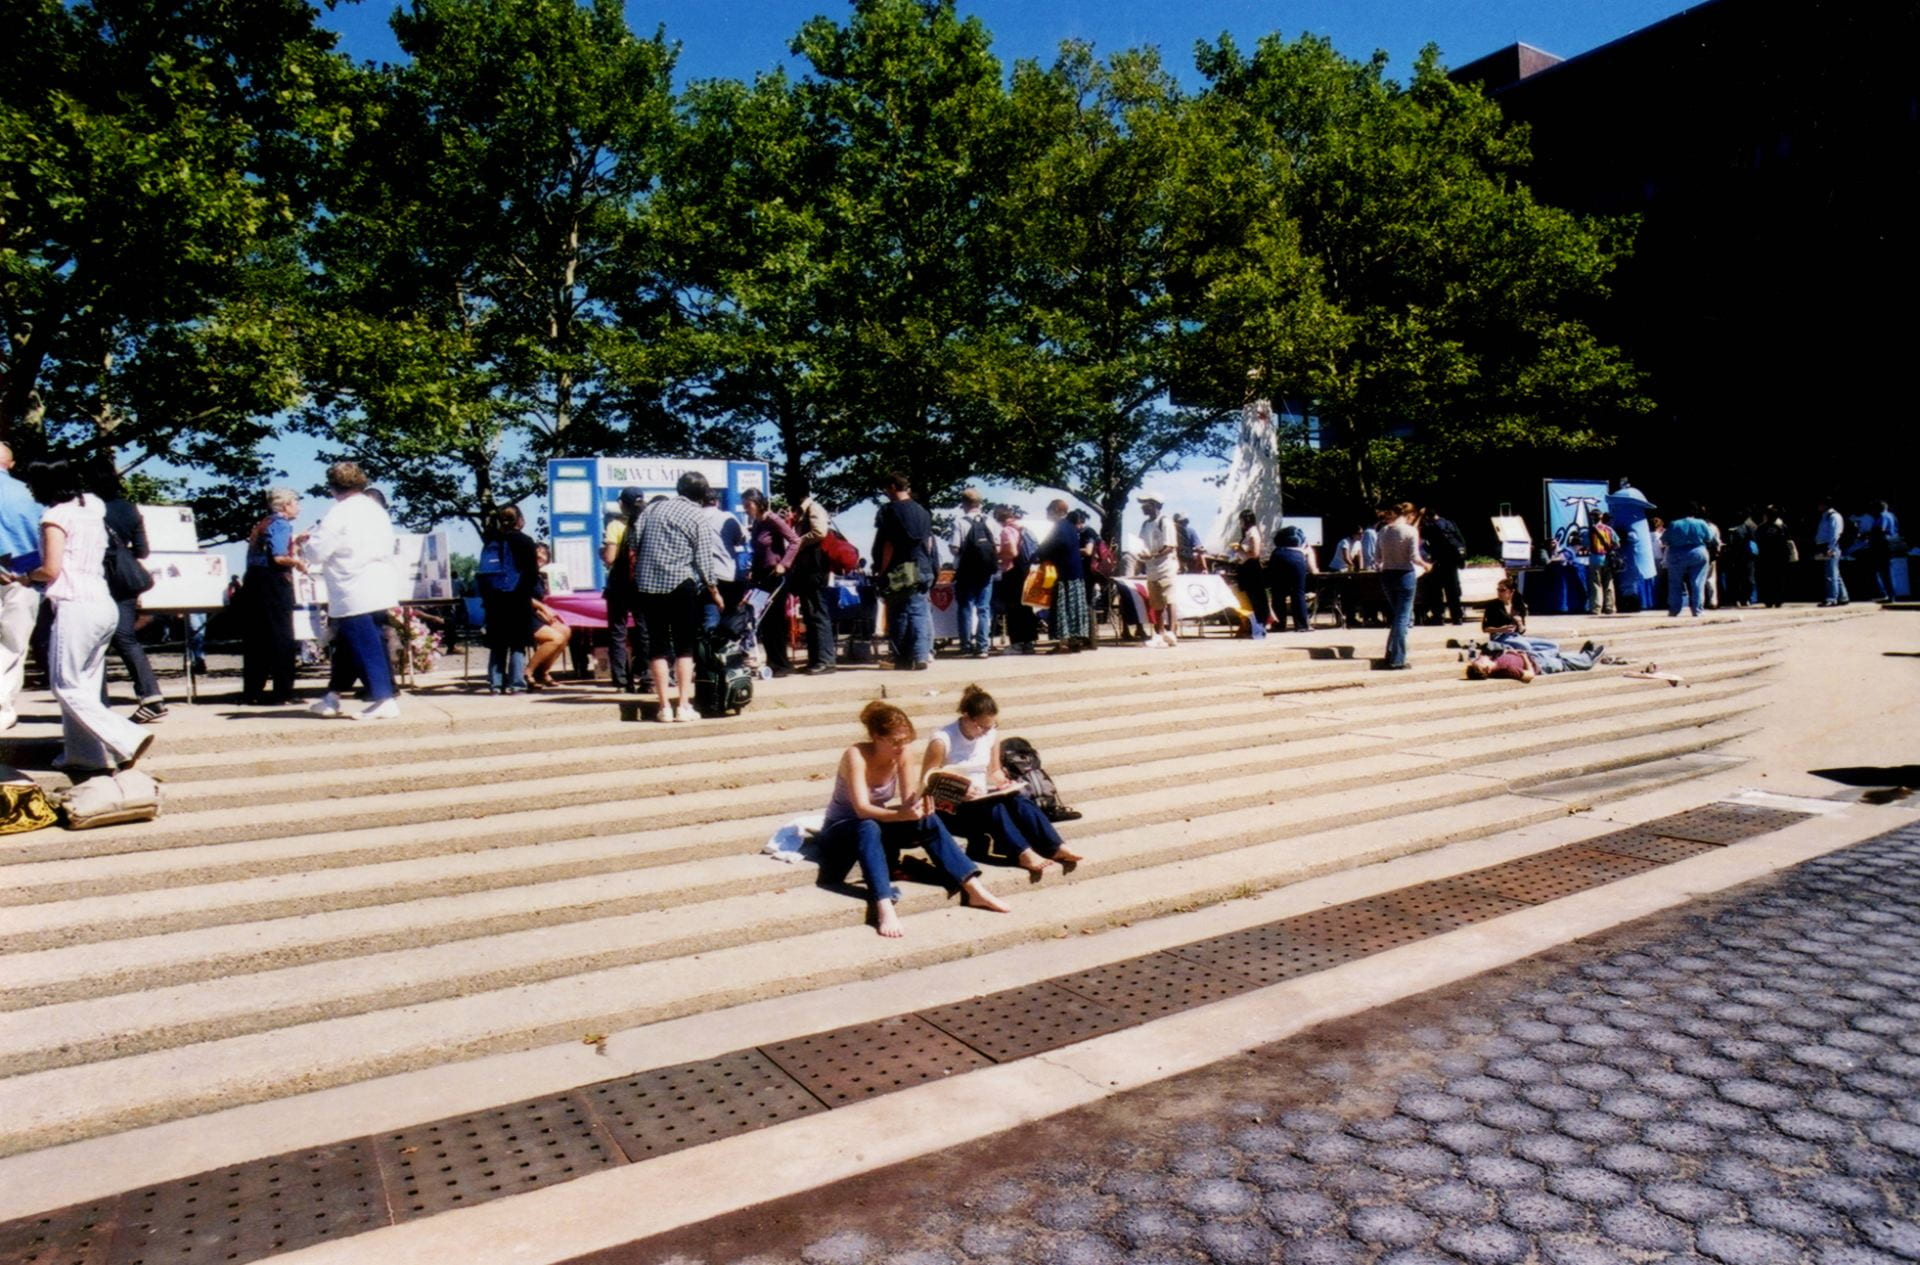 Color photograph of people looking at poster displays on the UMass Boston campus, with a few people sitting on steps in the foreground